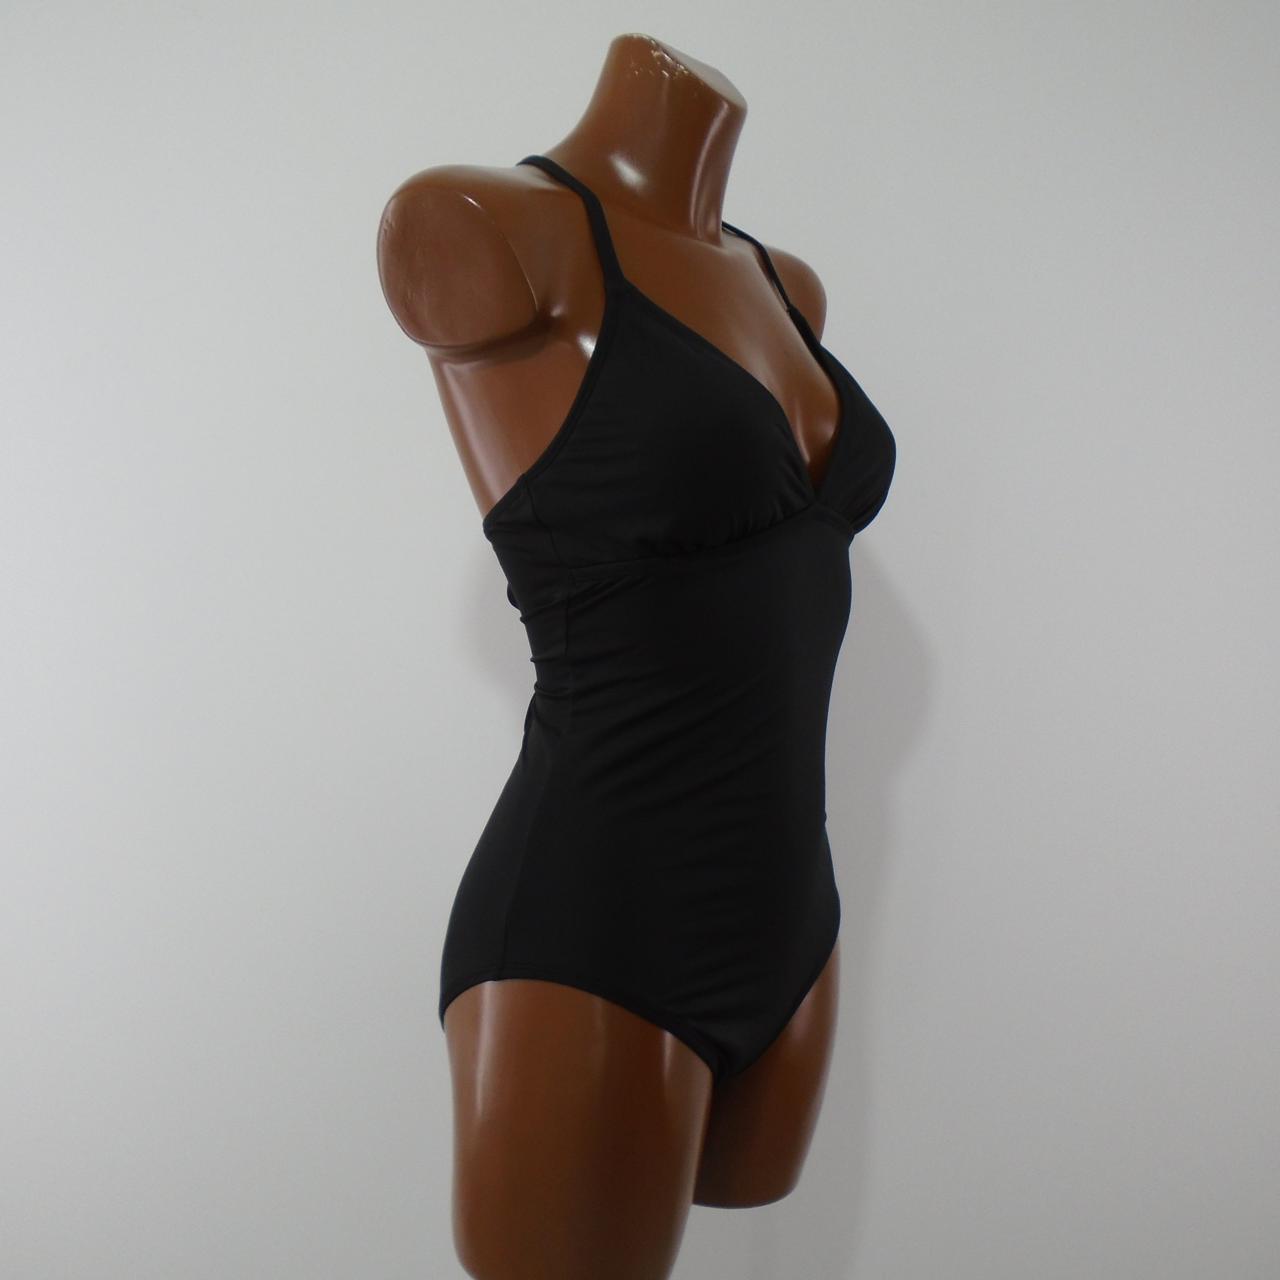 Women's Swimsuit Cleanwater. Black. S. Used. Good